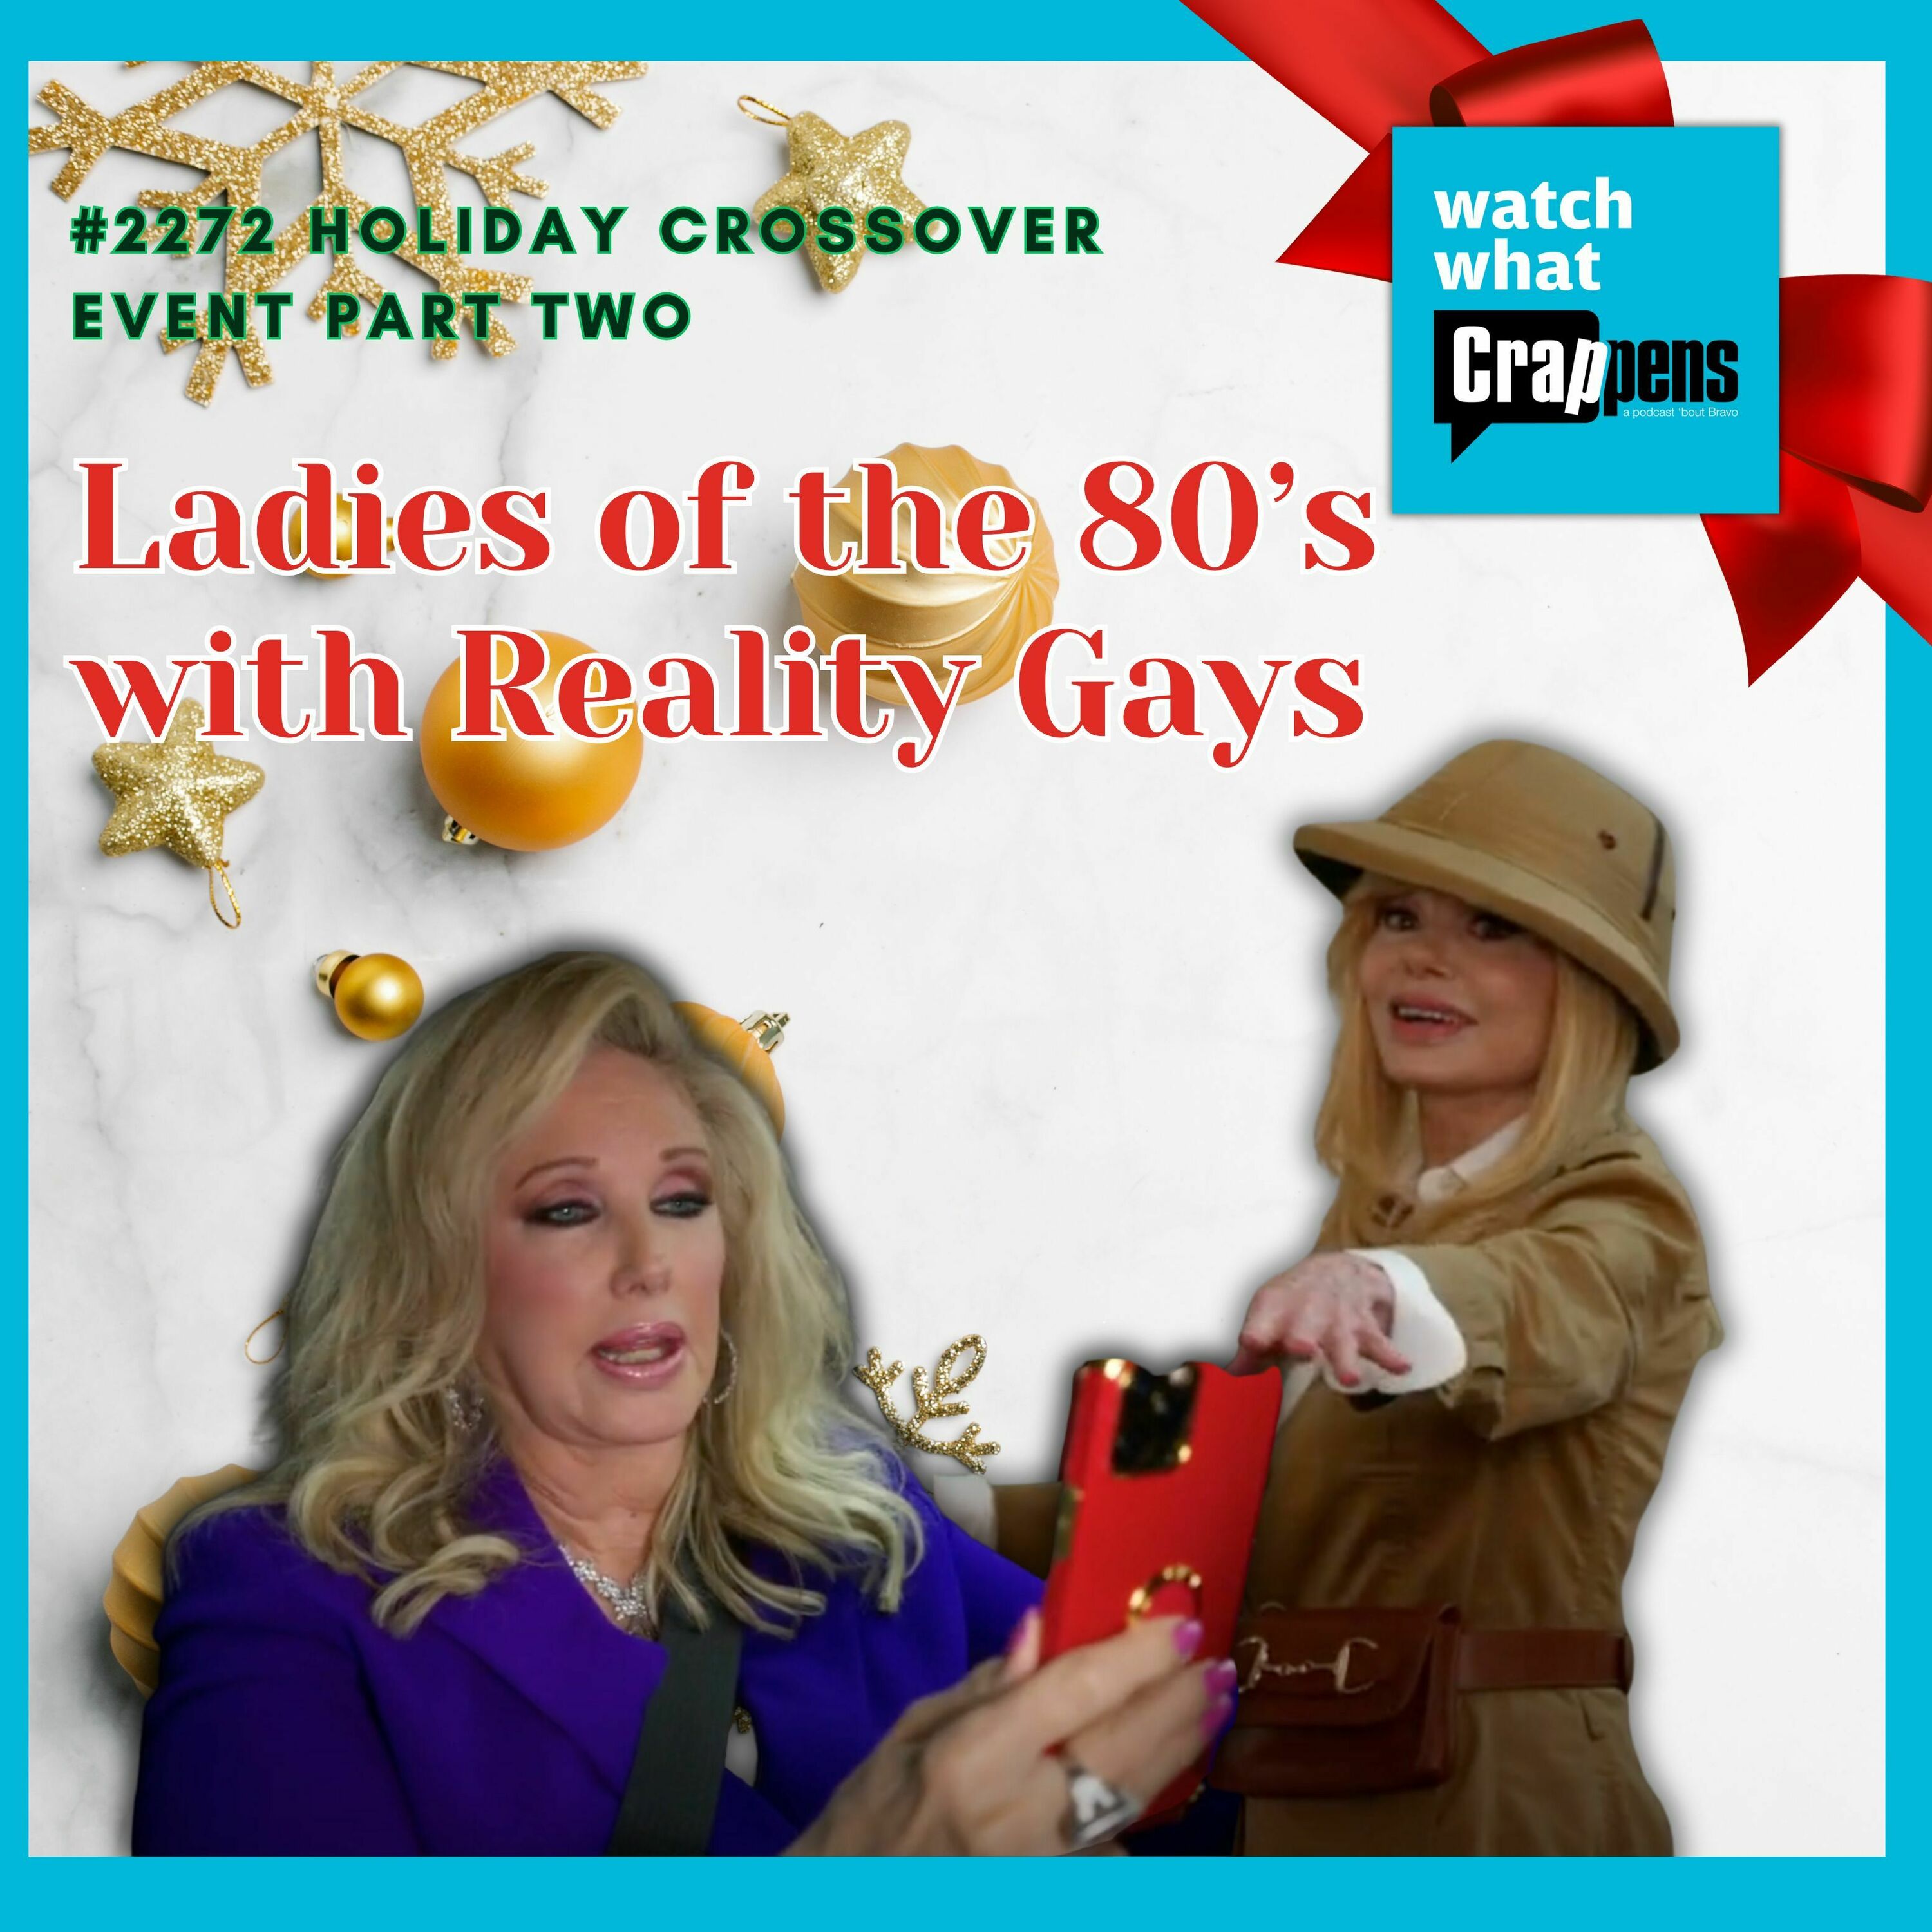 #2272 Holiday Crossover Event Part Two - Ladies of the 80’s with Reality Gays